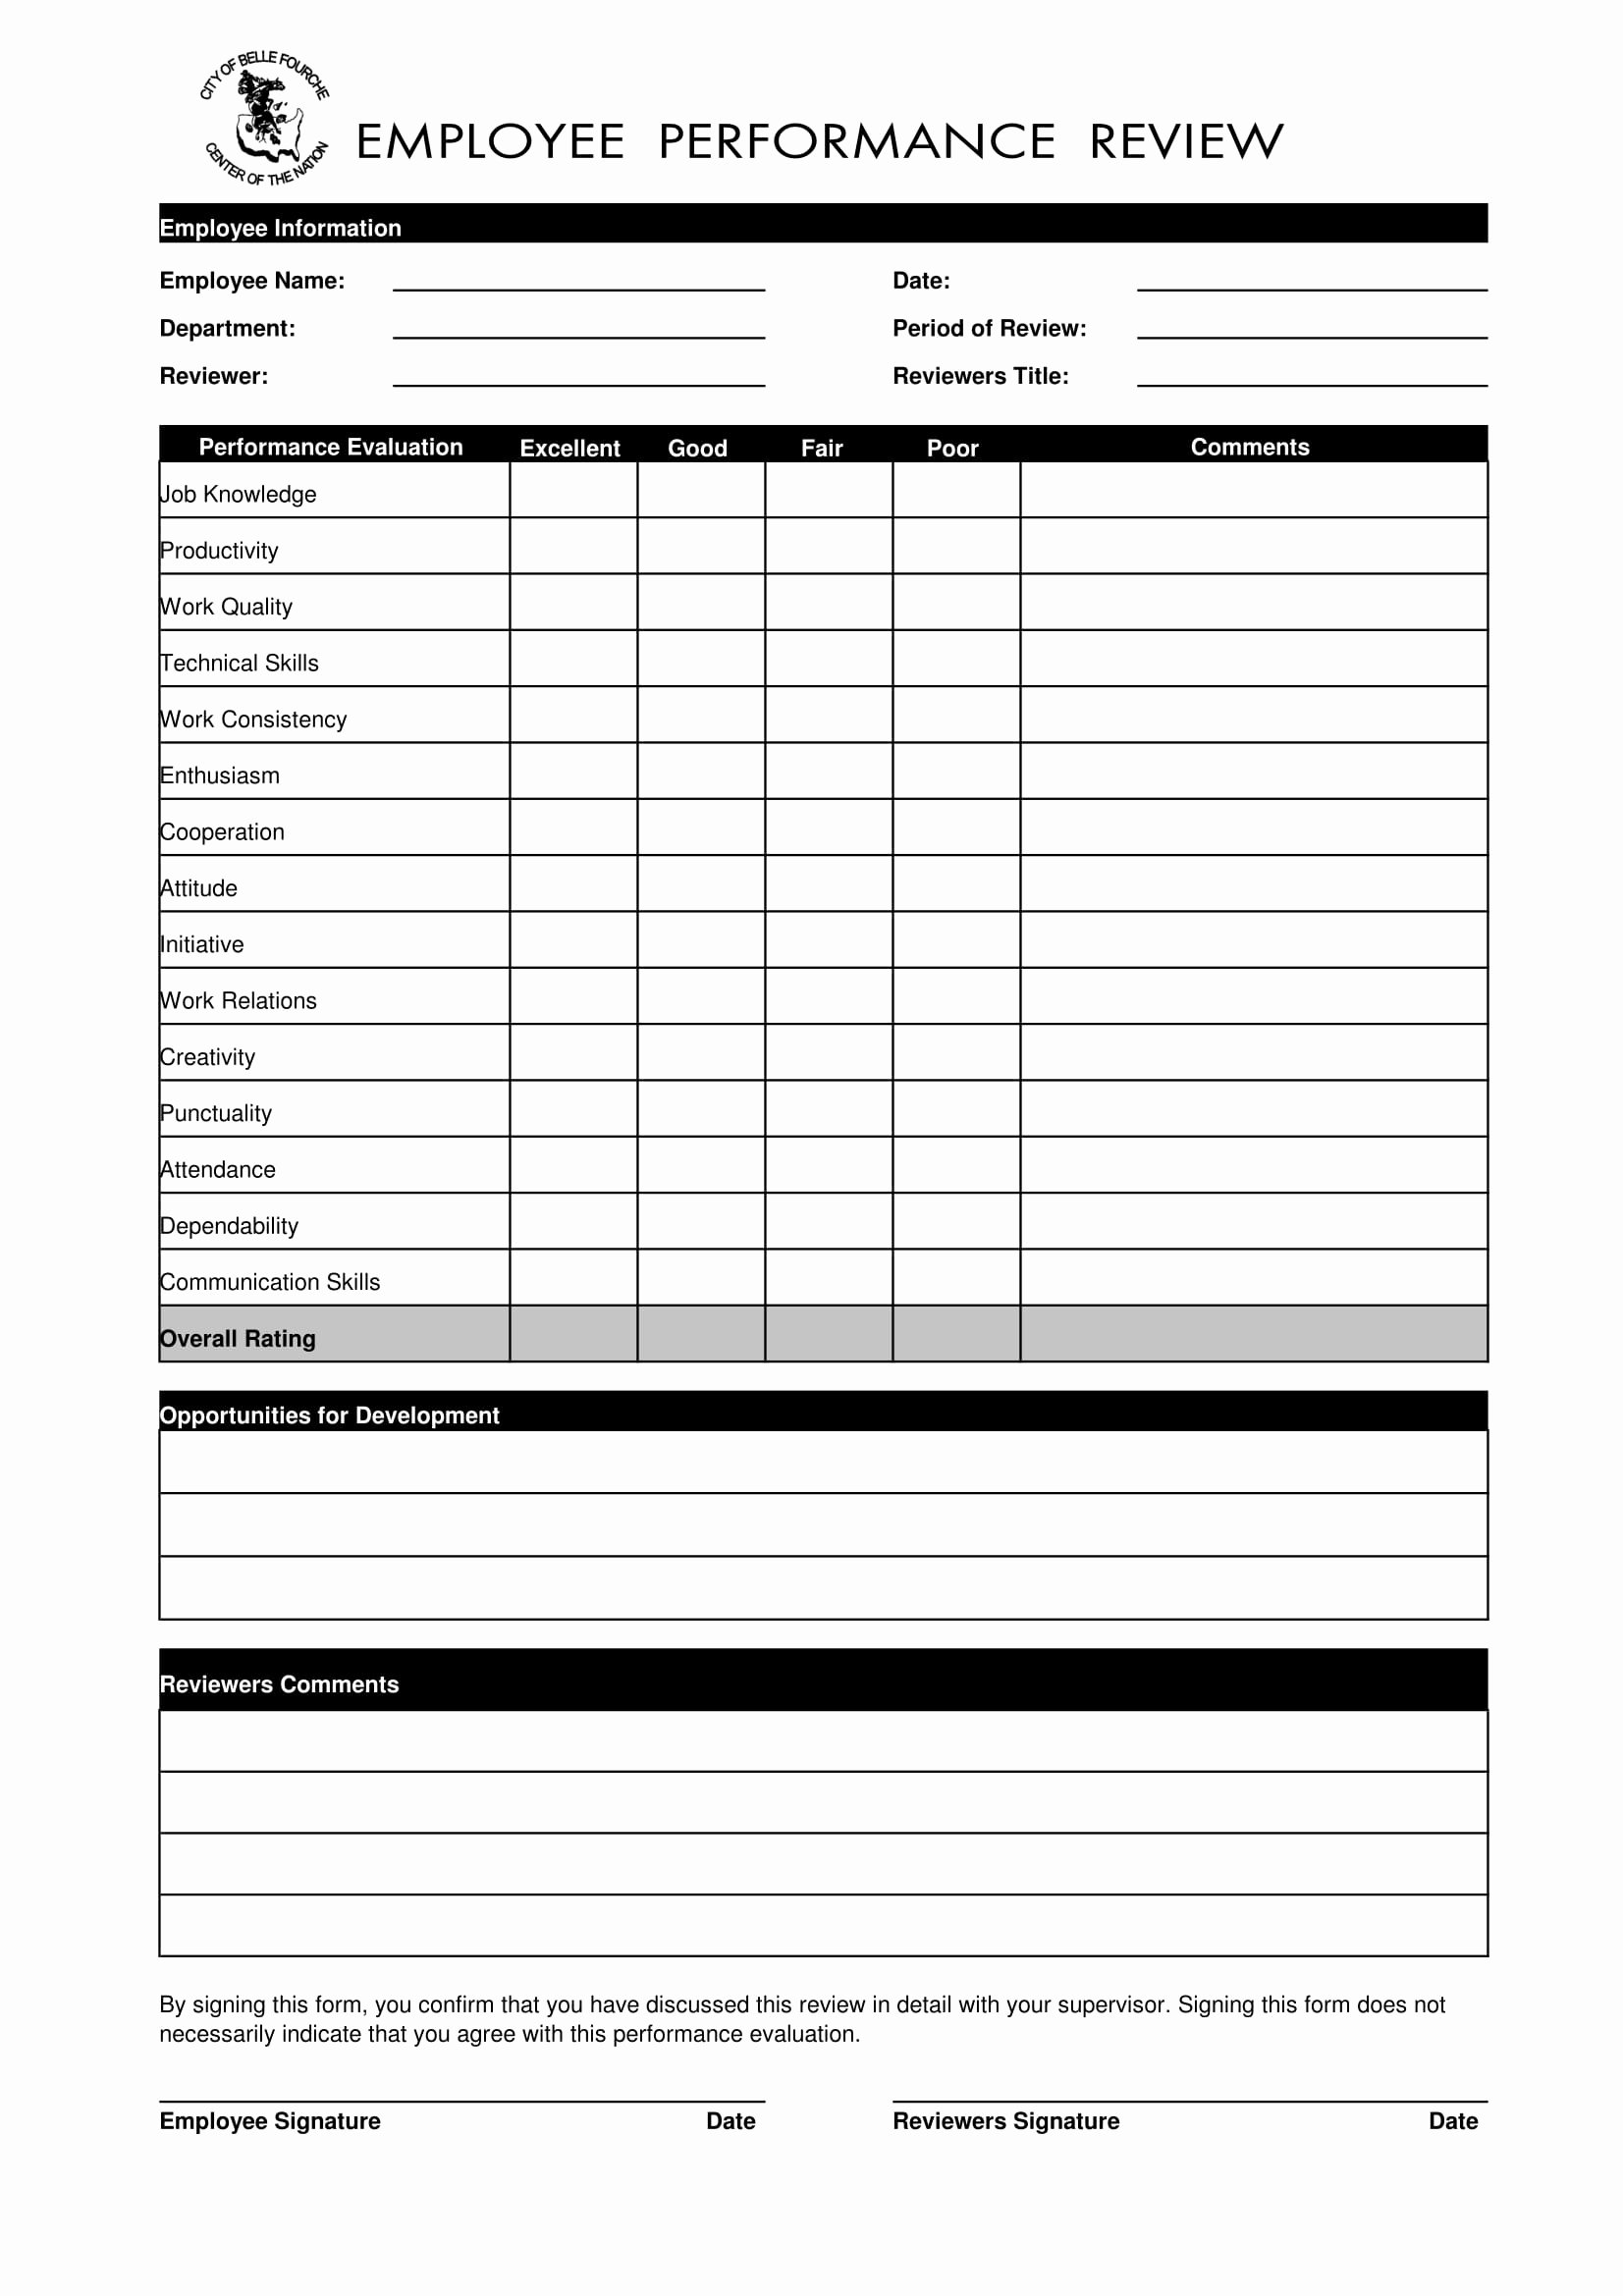 Employee Review form Template Free Beautiful 14 forms for Employee Reviews